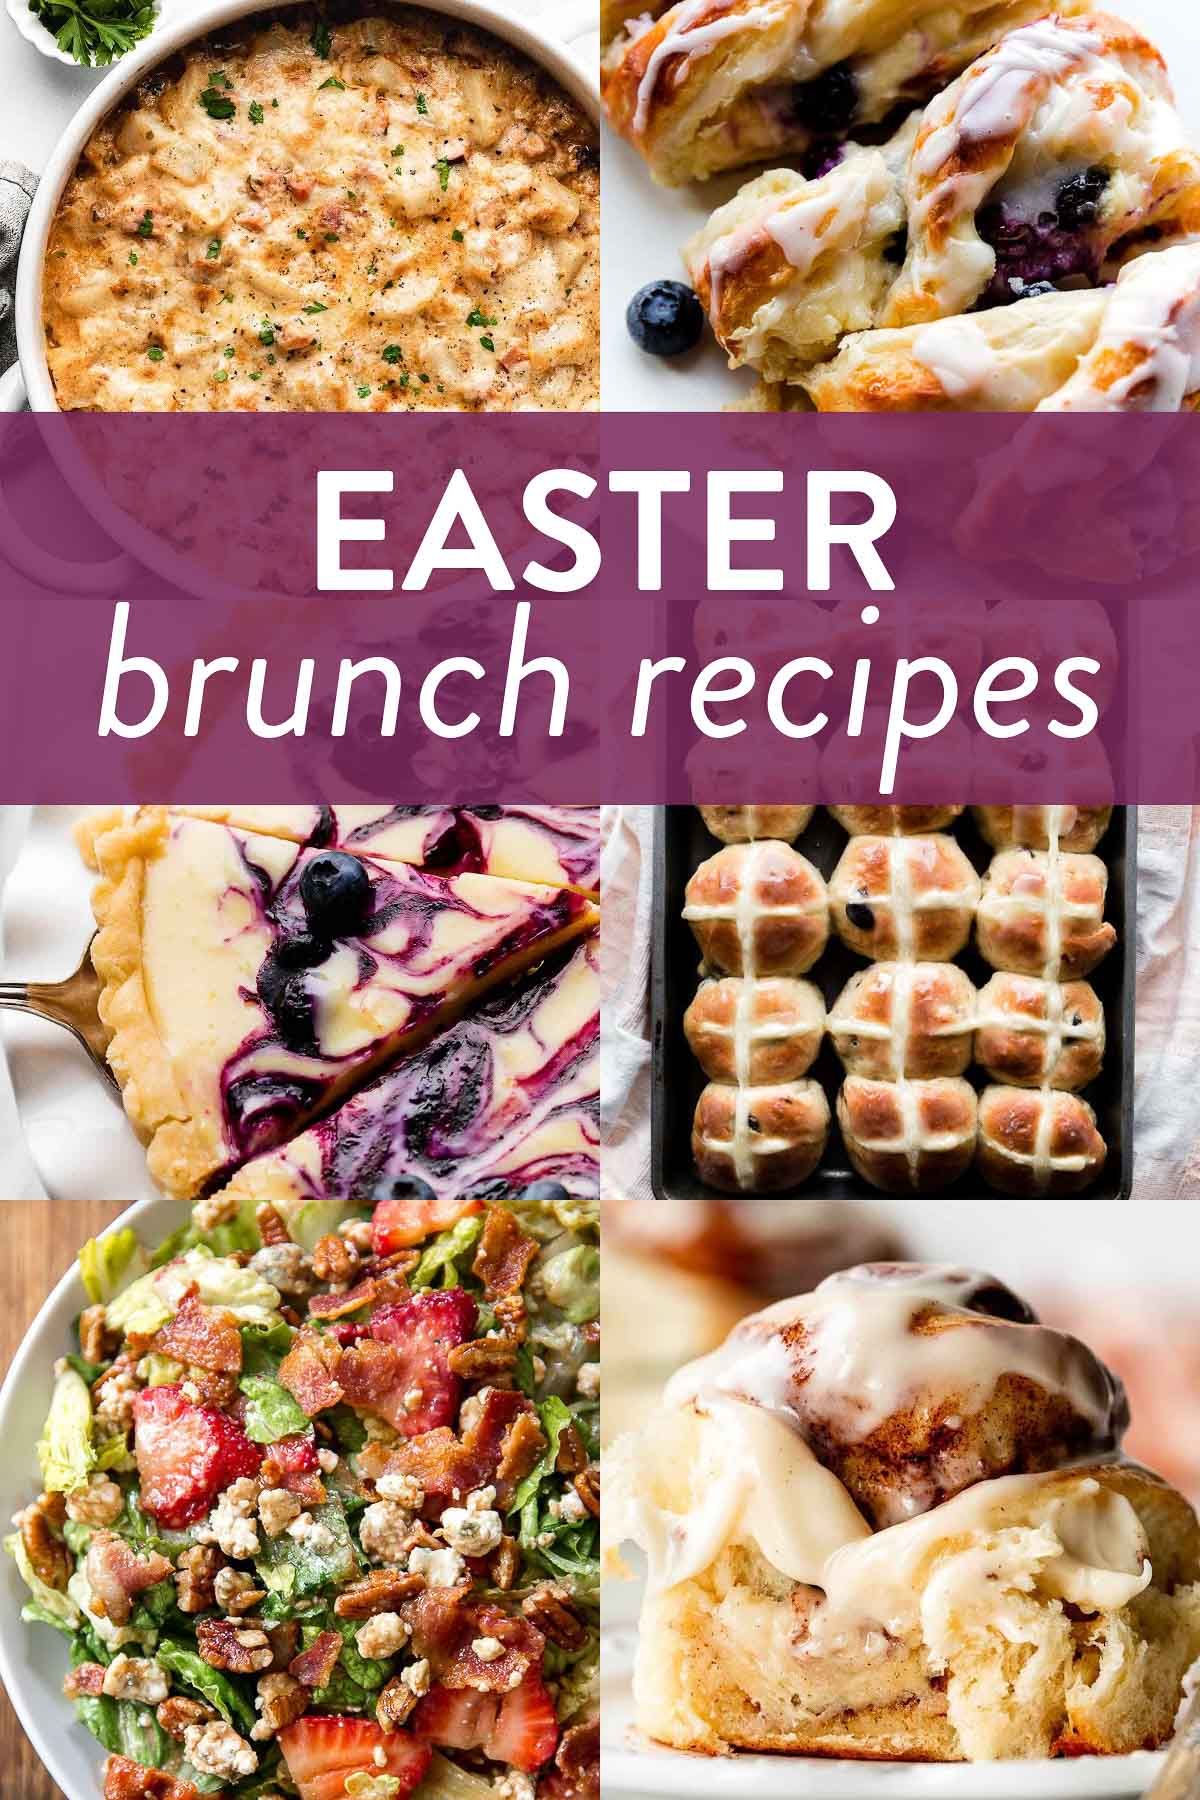 graphic collage of Easter brunch recipes including ham and potato casserole, blueberry cream cheese braid, lemon blueberry tart, strawberry bacon salad, and hot cross buns.